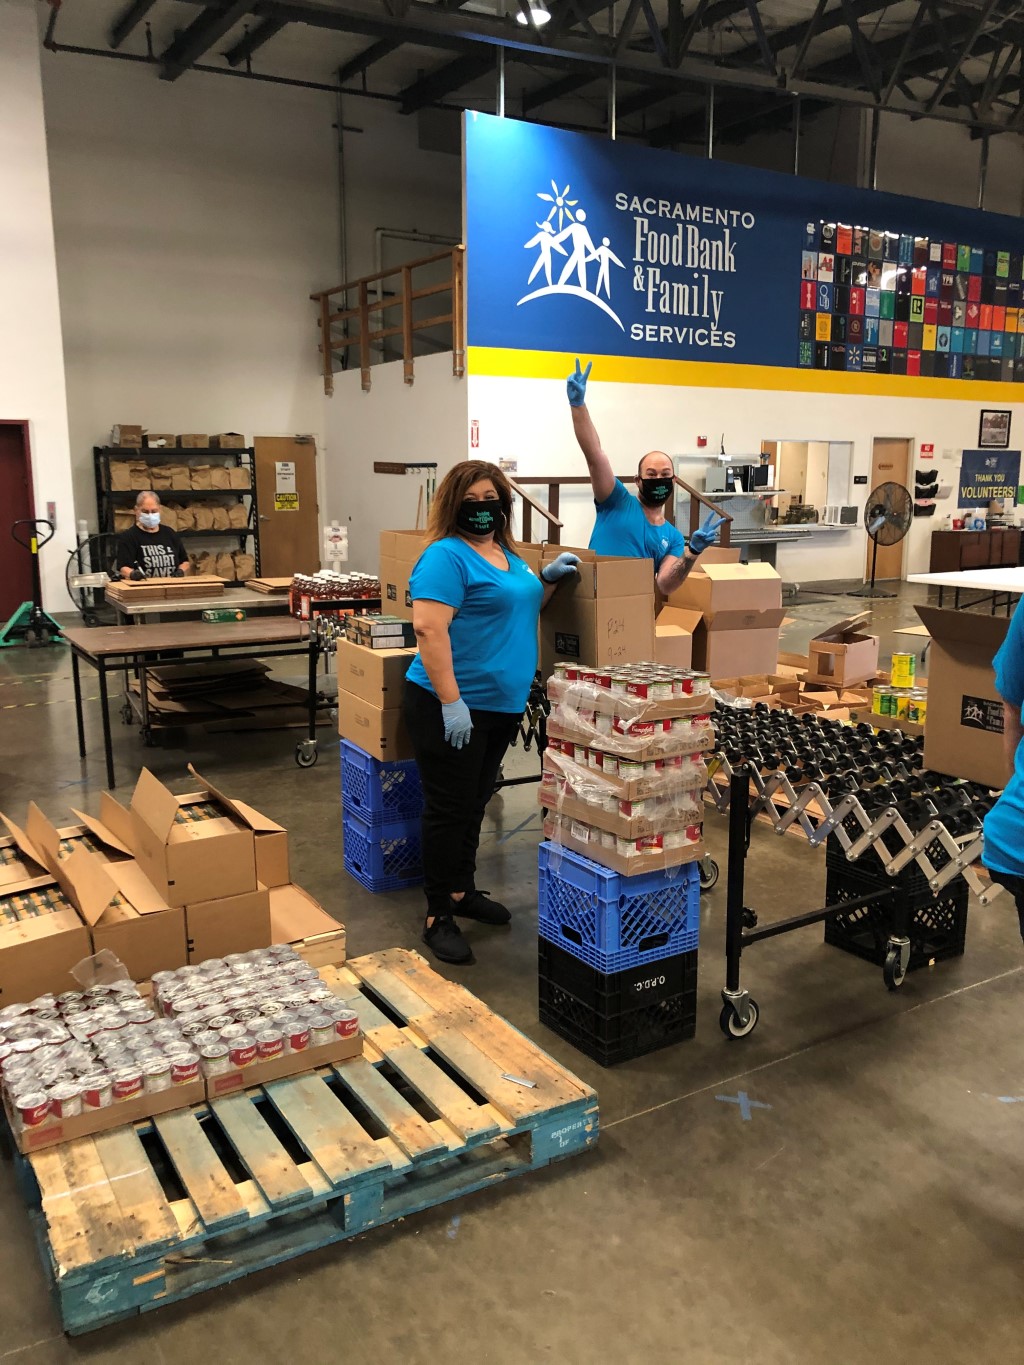 SAFE CU employees volunteer at Sacramento Food Bank and Family Services